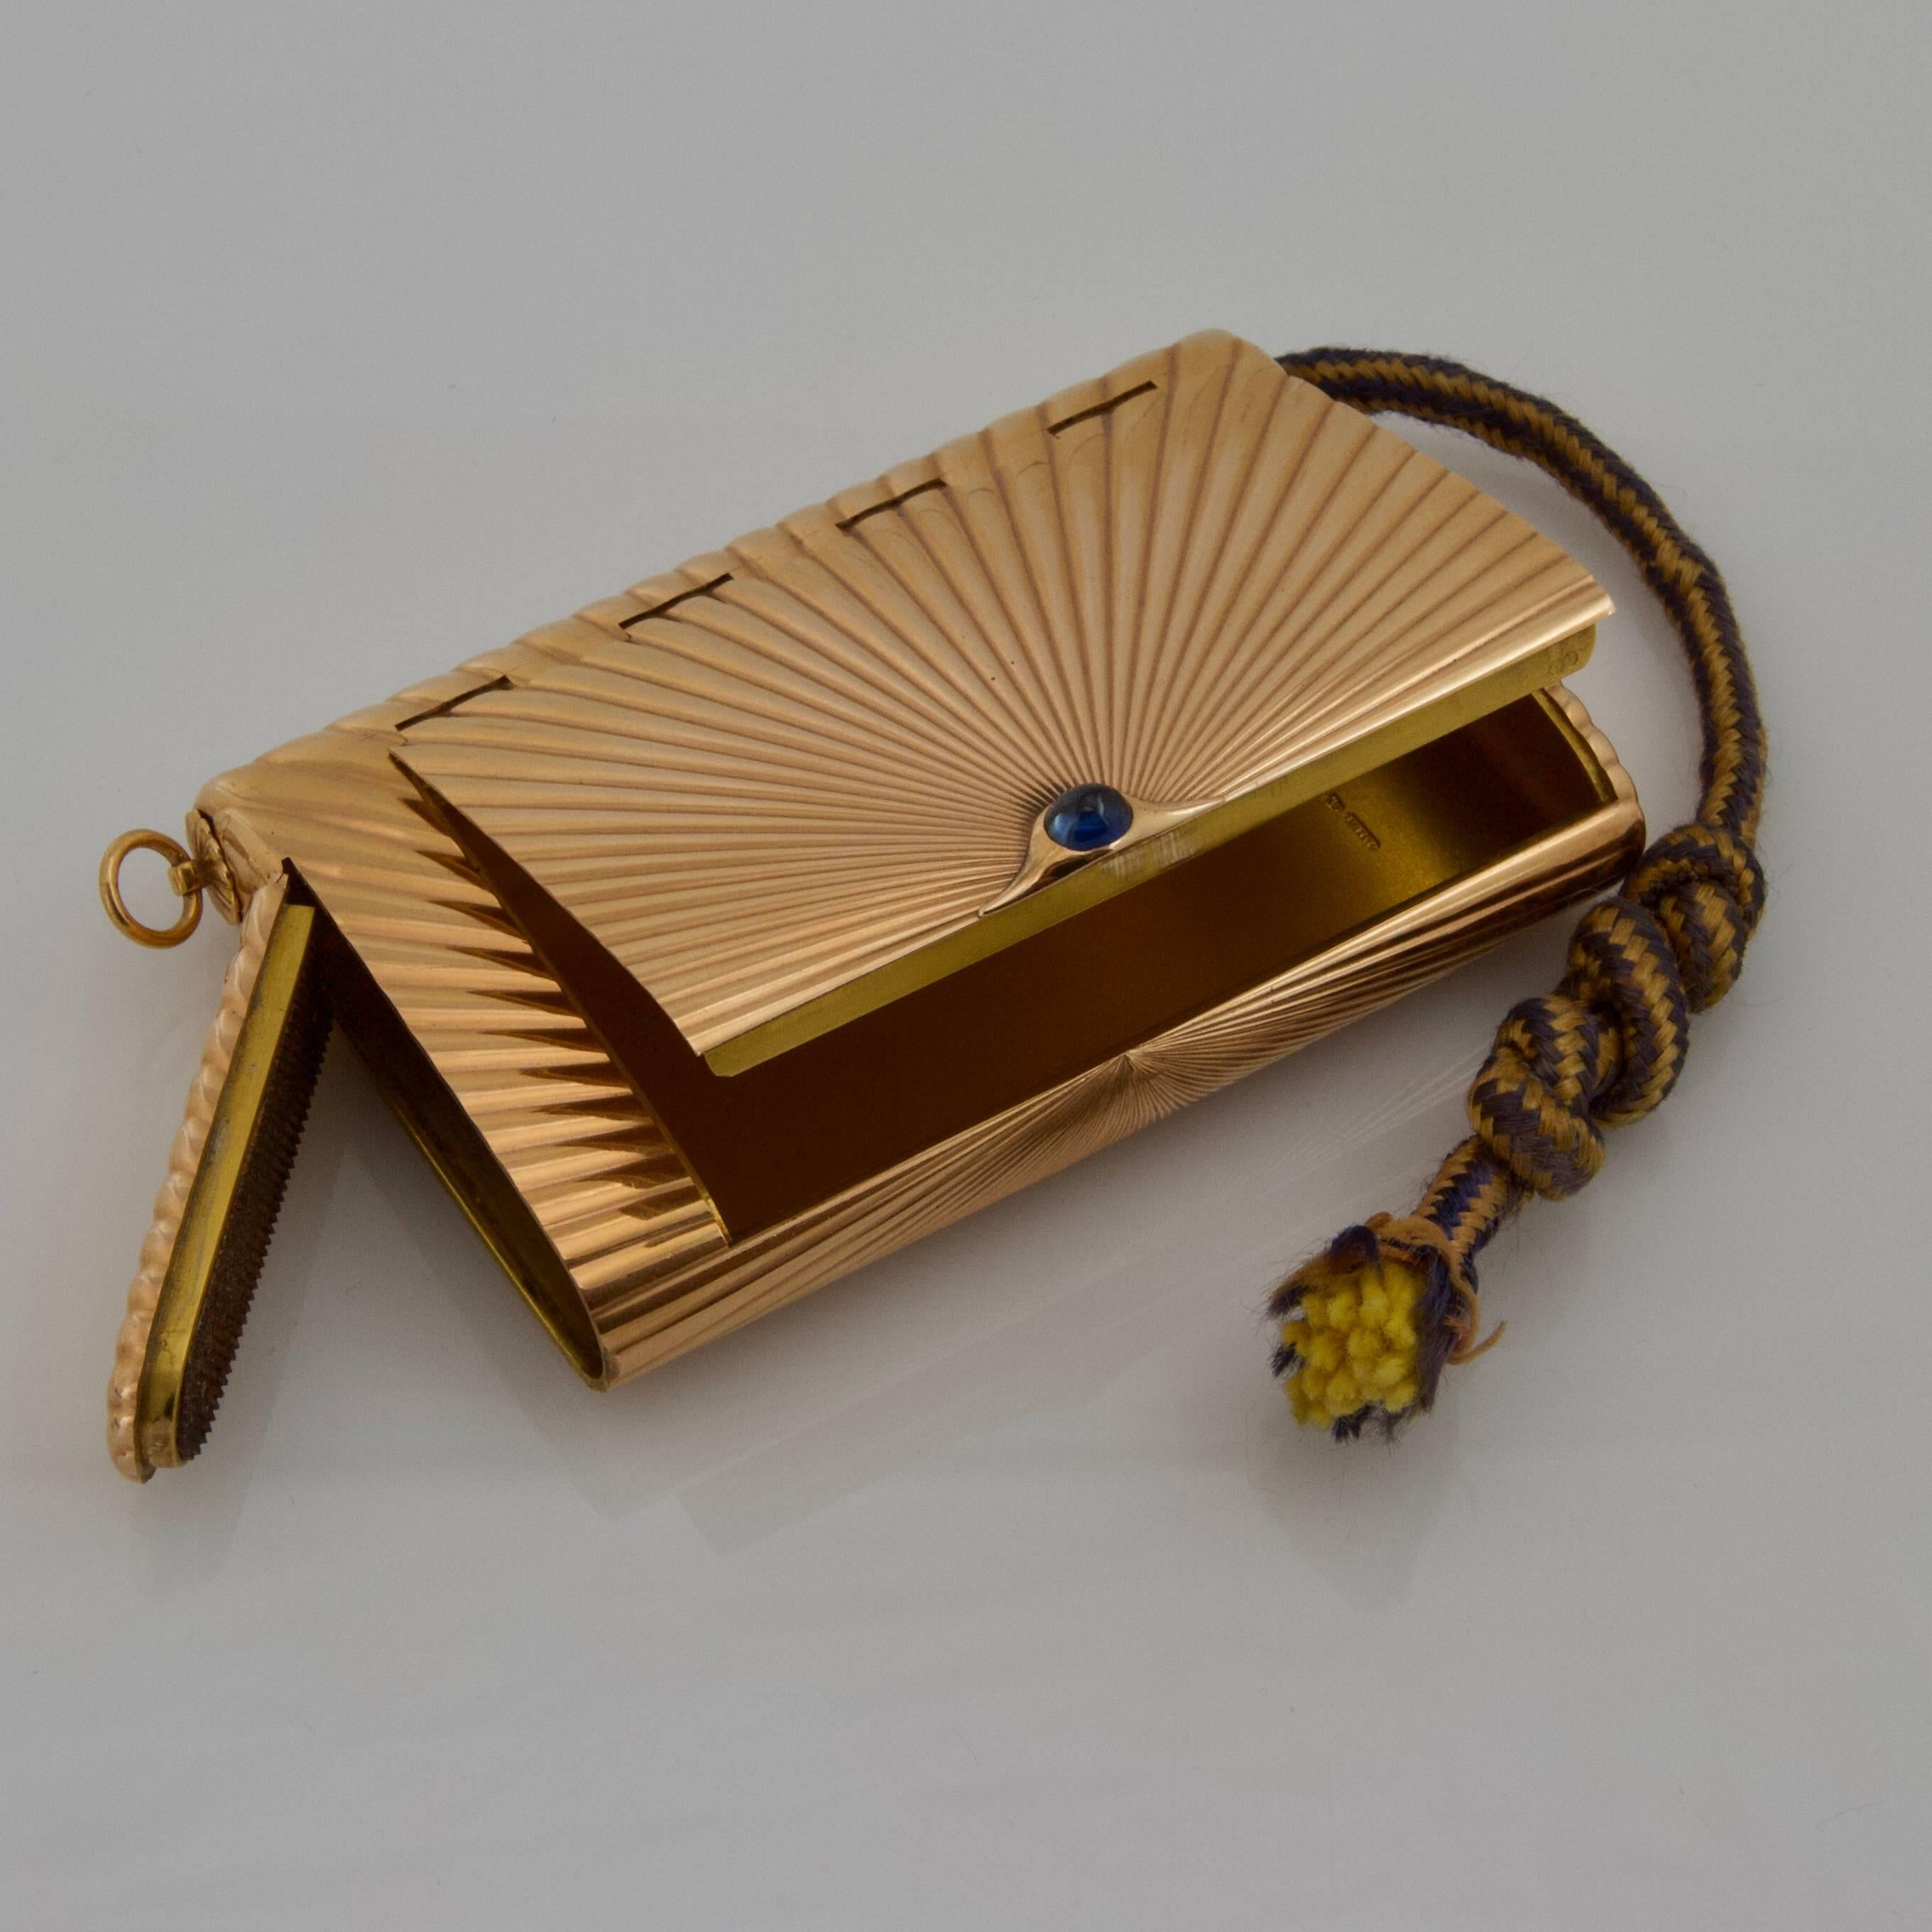 An 18-carat pink gold case with invisible hinged lid, the short ends rounded, the top and bottom engraved with a sunburst reeded pattern. The end with a vesta case compartment. Violet and yellow tinder cord retained by a ring. Cabochon sapphire